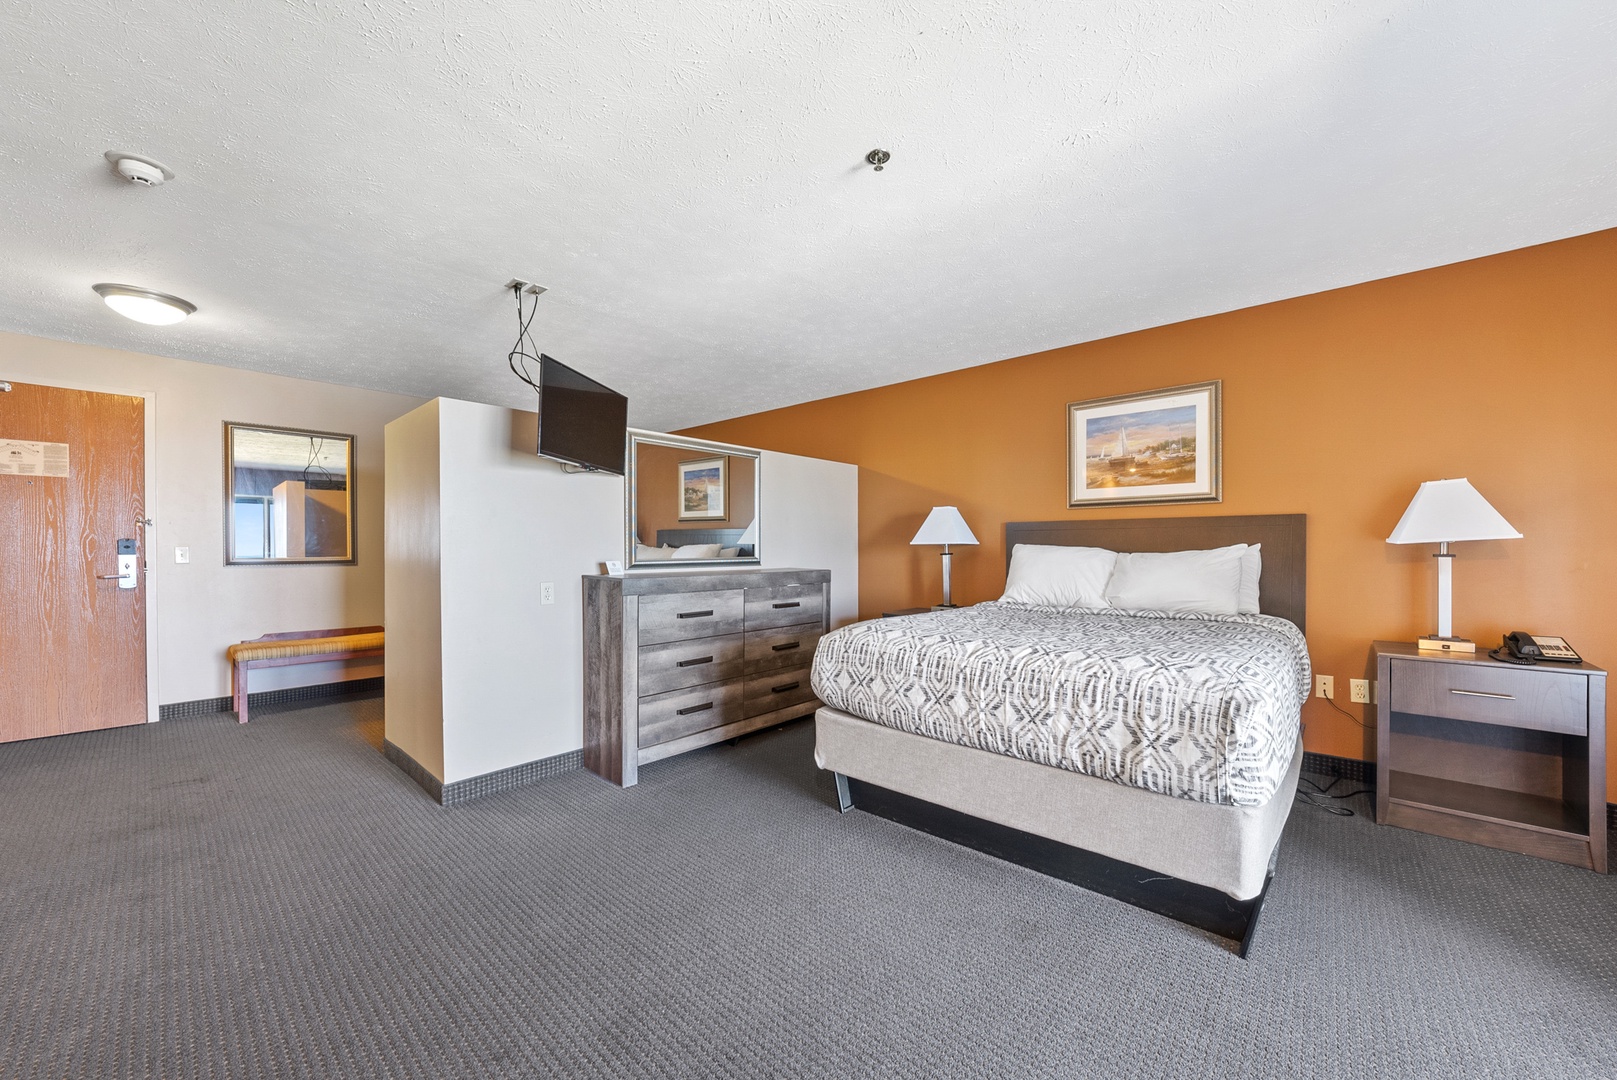 Your Home Away from Home: Spacious Suite with Convenient Room Divider